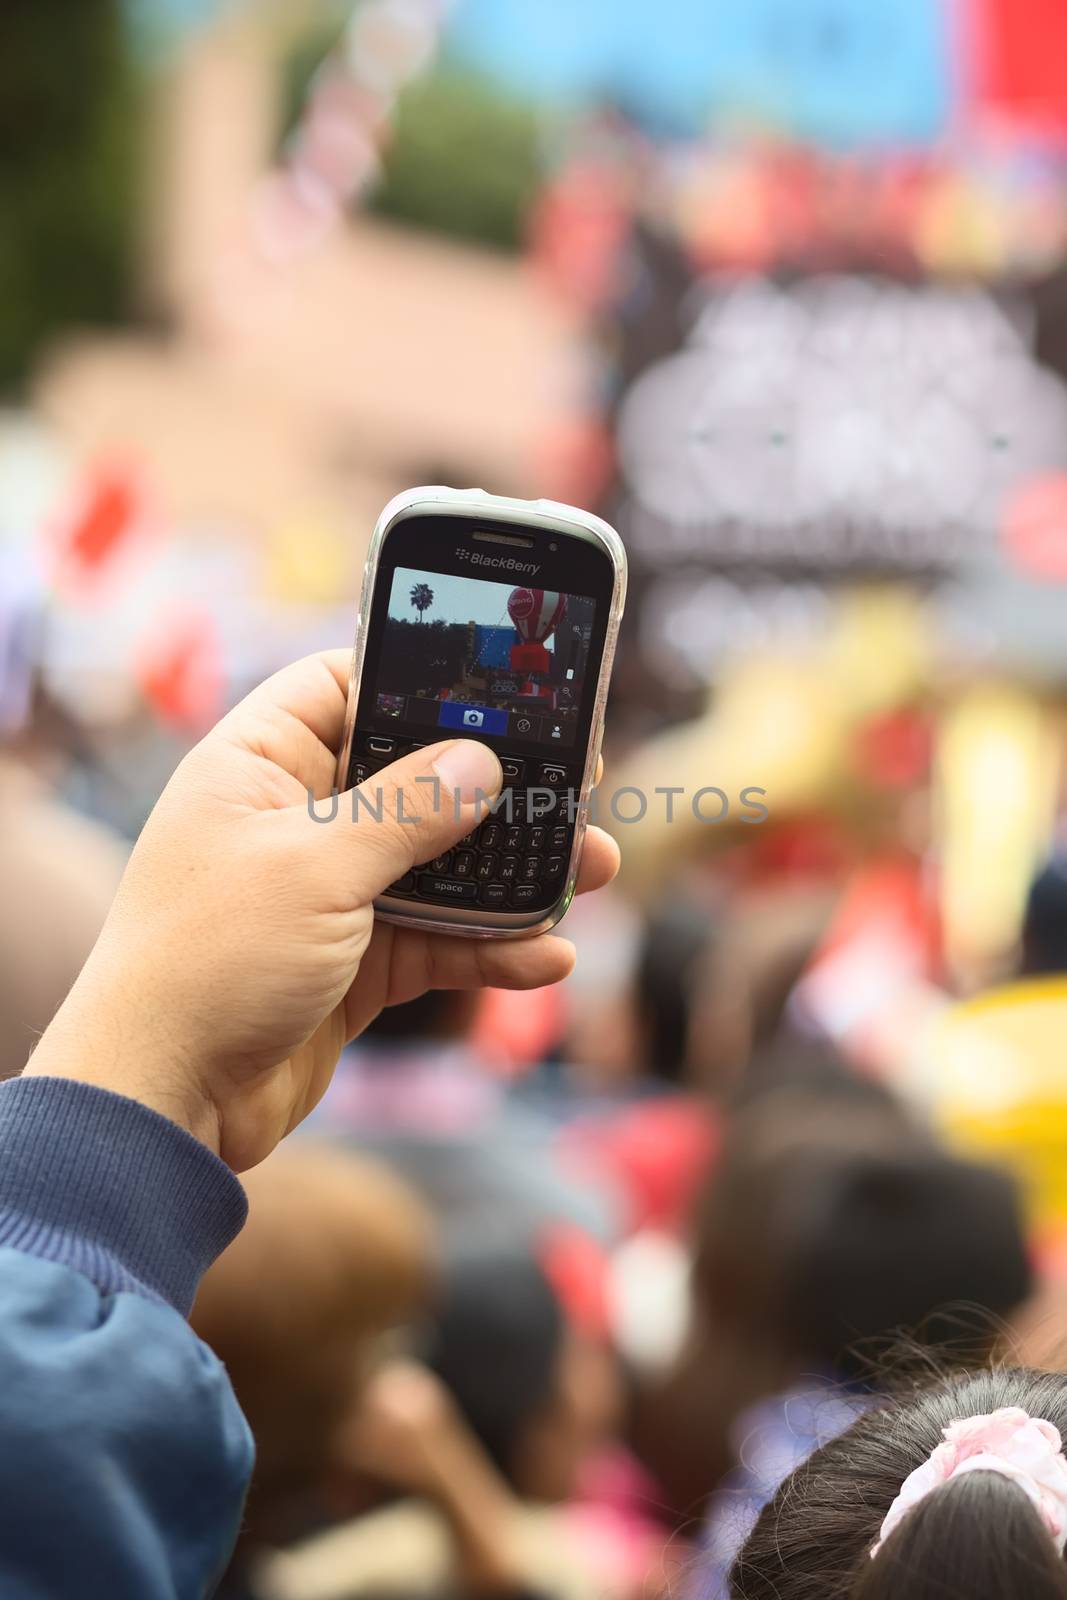 LIMA, PERU - JULY 21, 2013: Unidentified person holding a Blackberry mobile phone to take a photo on the Wong Parade in Miraflores on July 21, 2013 in Lima, Peru. The Parade (Gran Corso de Wong) is a traditional parade to celebrate the Peruvian national holiday which is on July 28-29. 